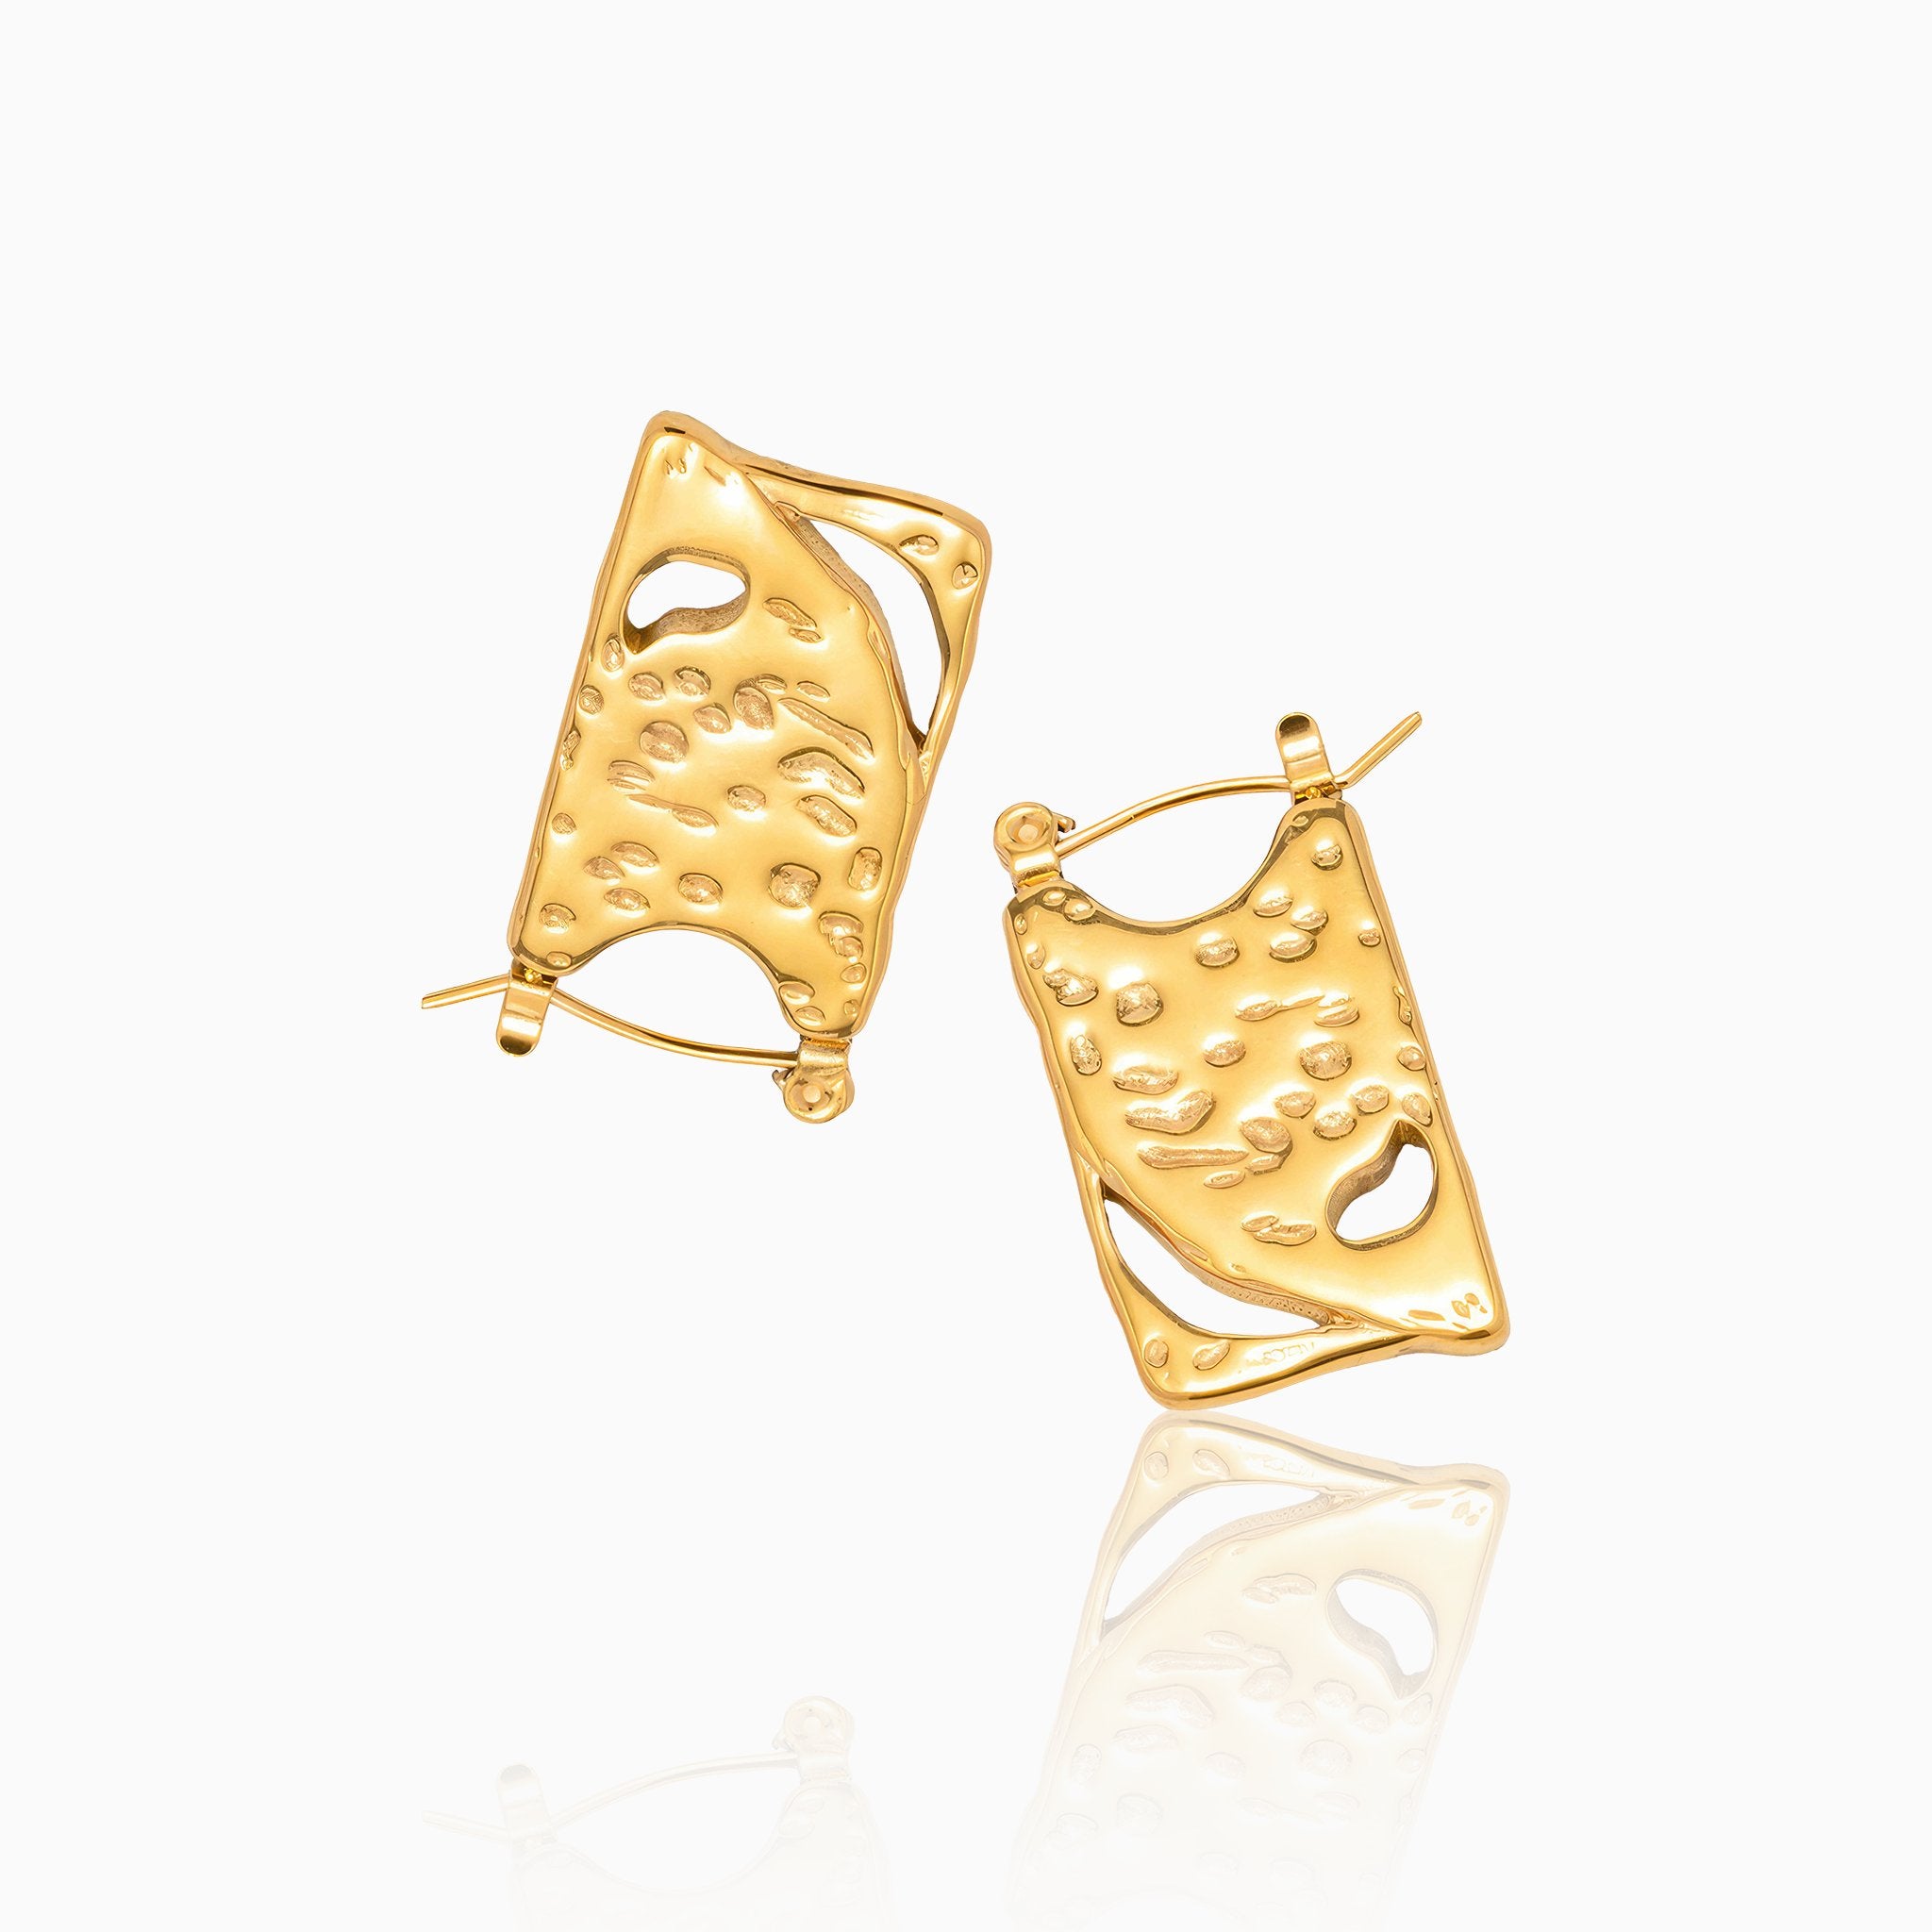 Cheese Grater Earrings - Nobbier - Earrings - 18K Gold And Titanium PVD Coated Jewelry